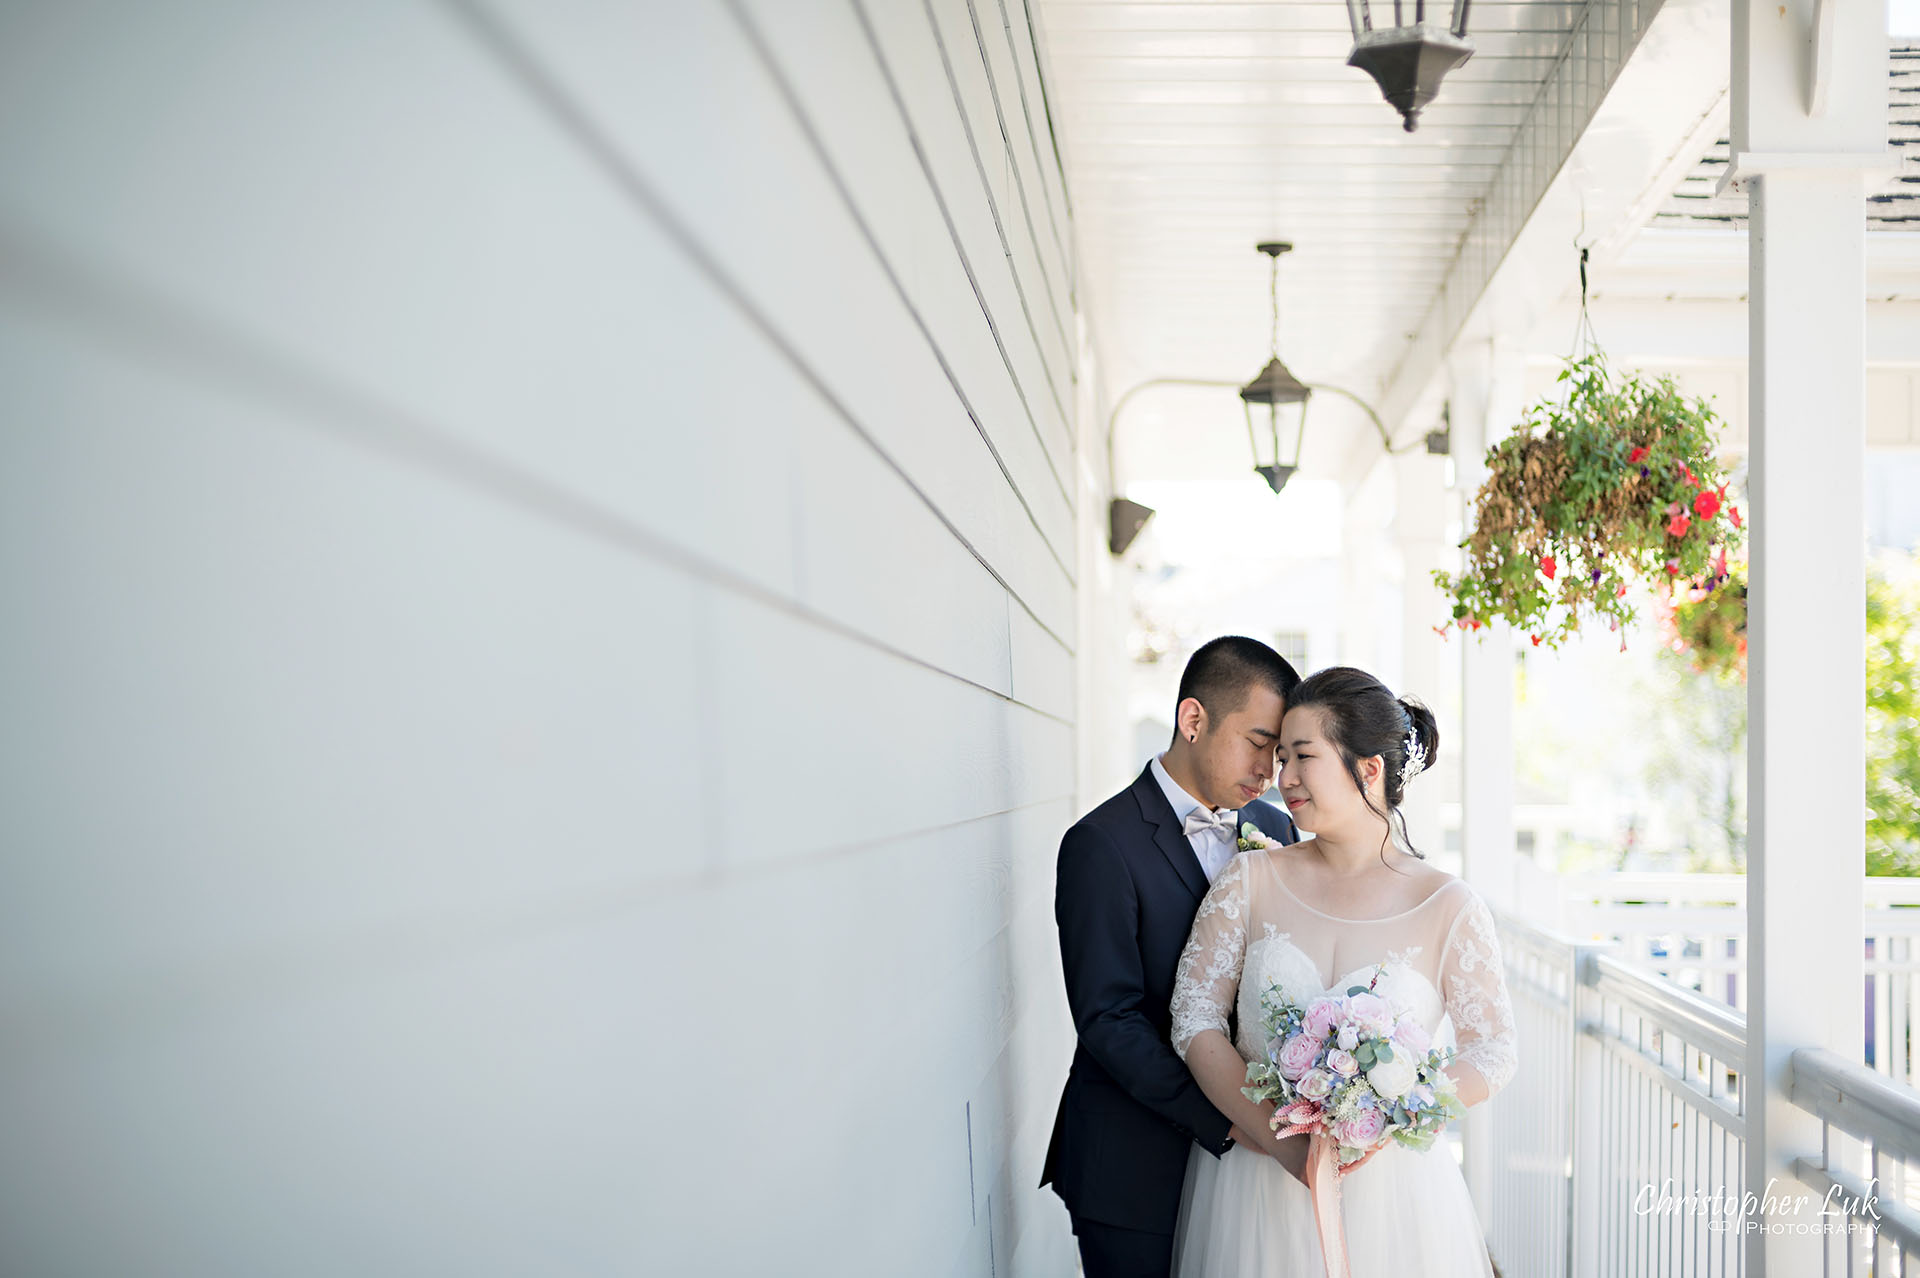 Christopher Luk Toronto Wedding Photographer The Doctor's House Chapel Kleinburg Natural Candid Photojournalistic Posed Bride Groom Hugging Holding Each Other Chandelier Intimate Landscape Micro Microwedding 